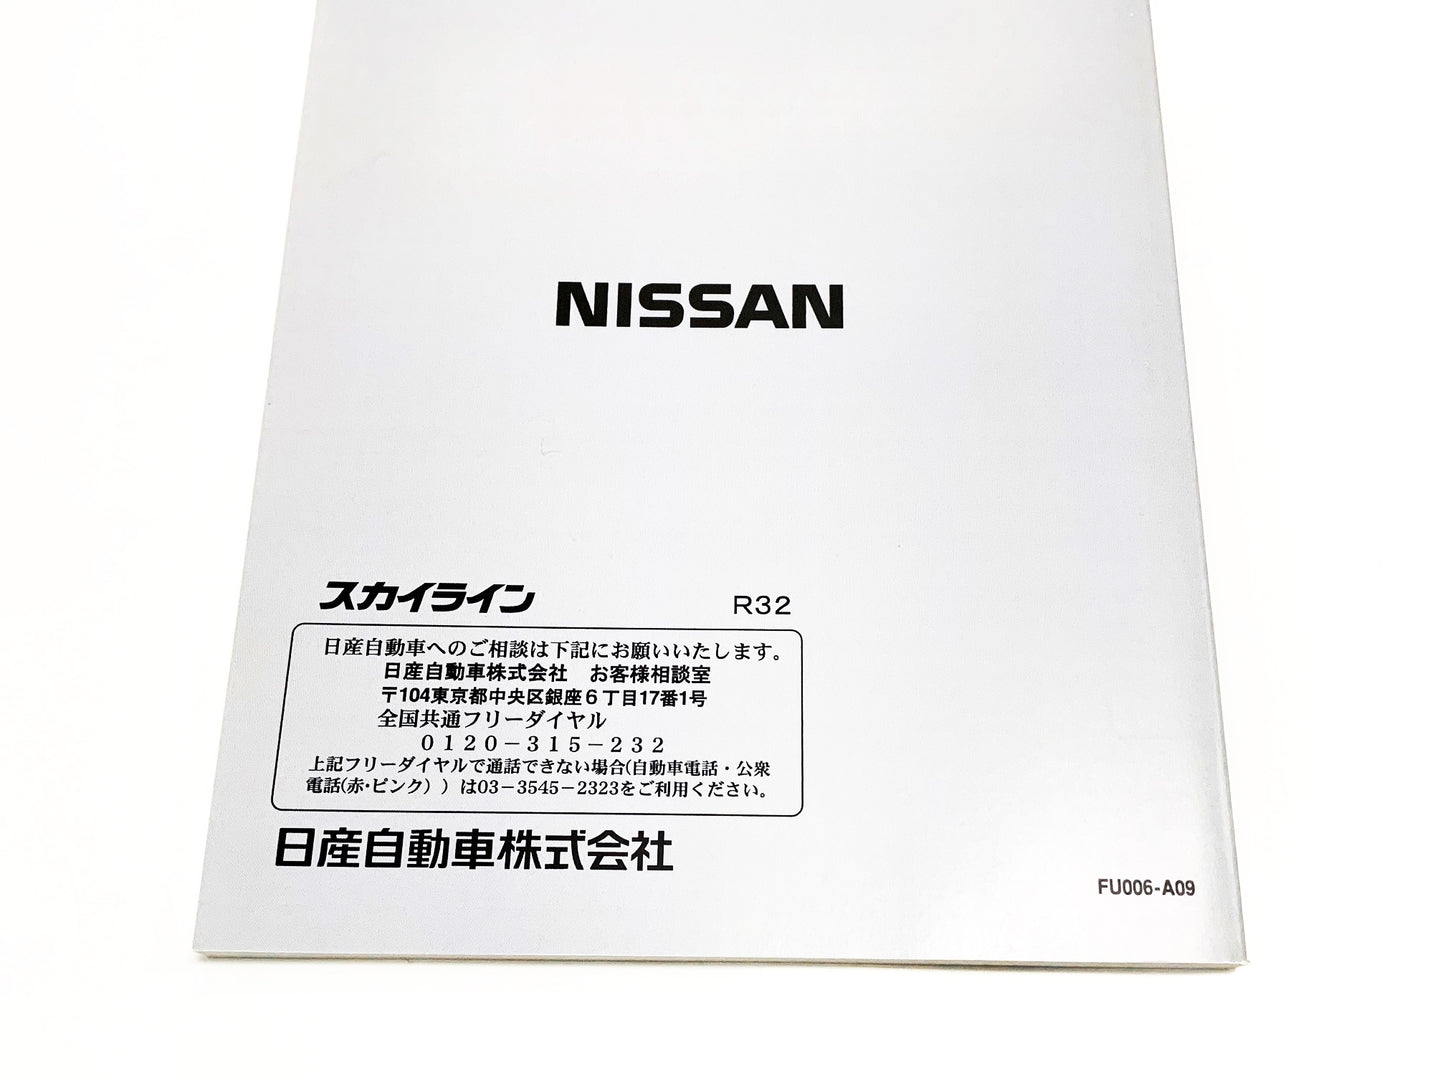 Nissan Owners Manual Book - R32 BNR32 1991/8-1993/8 ##663181359